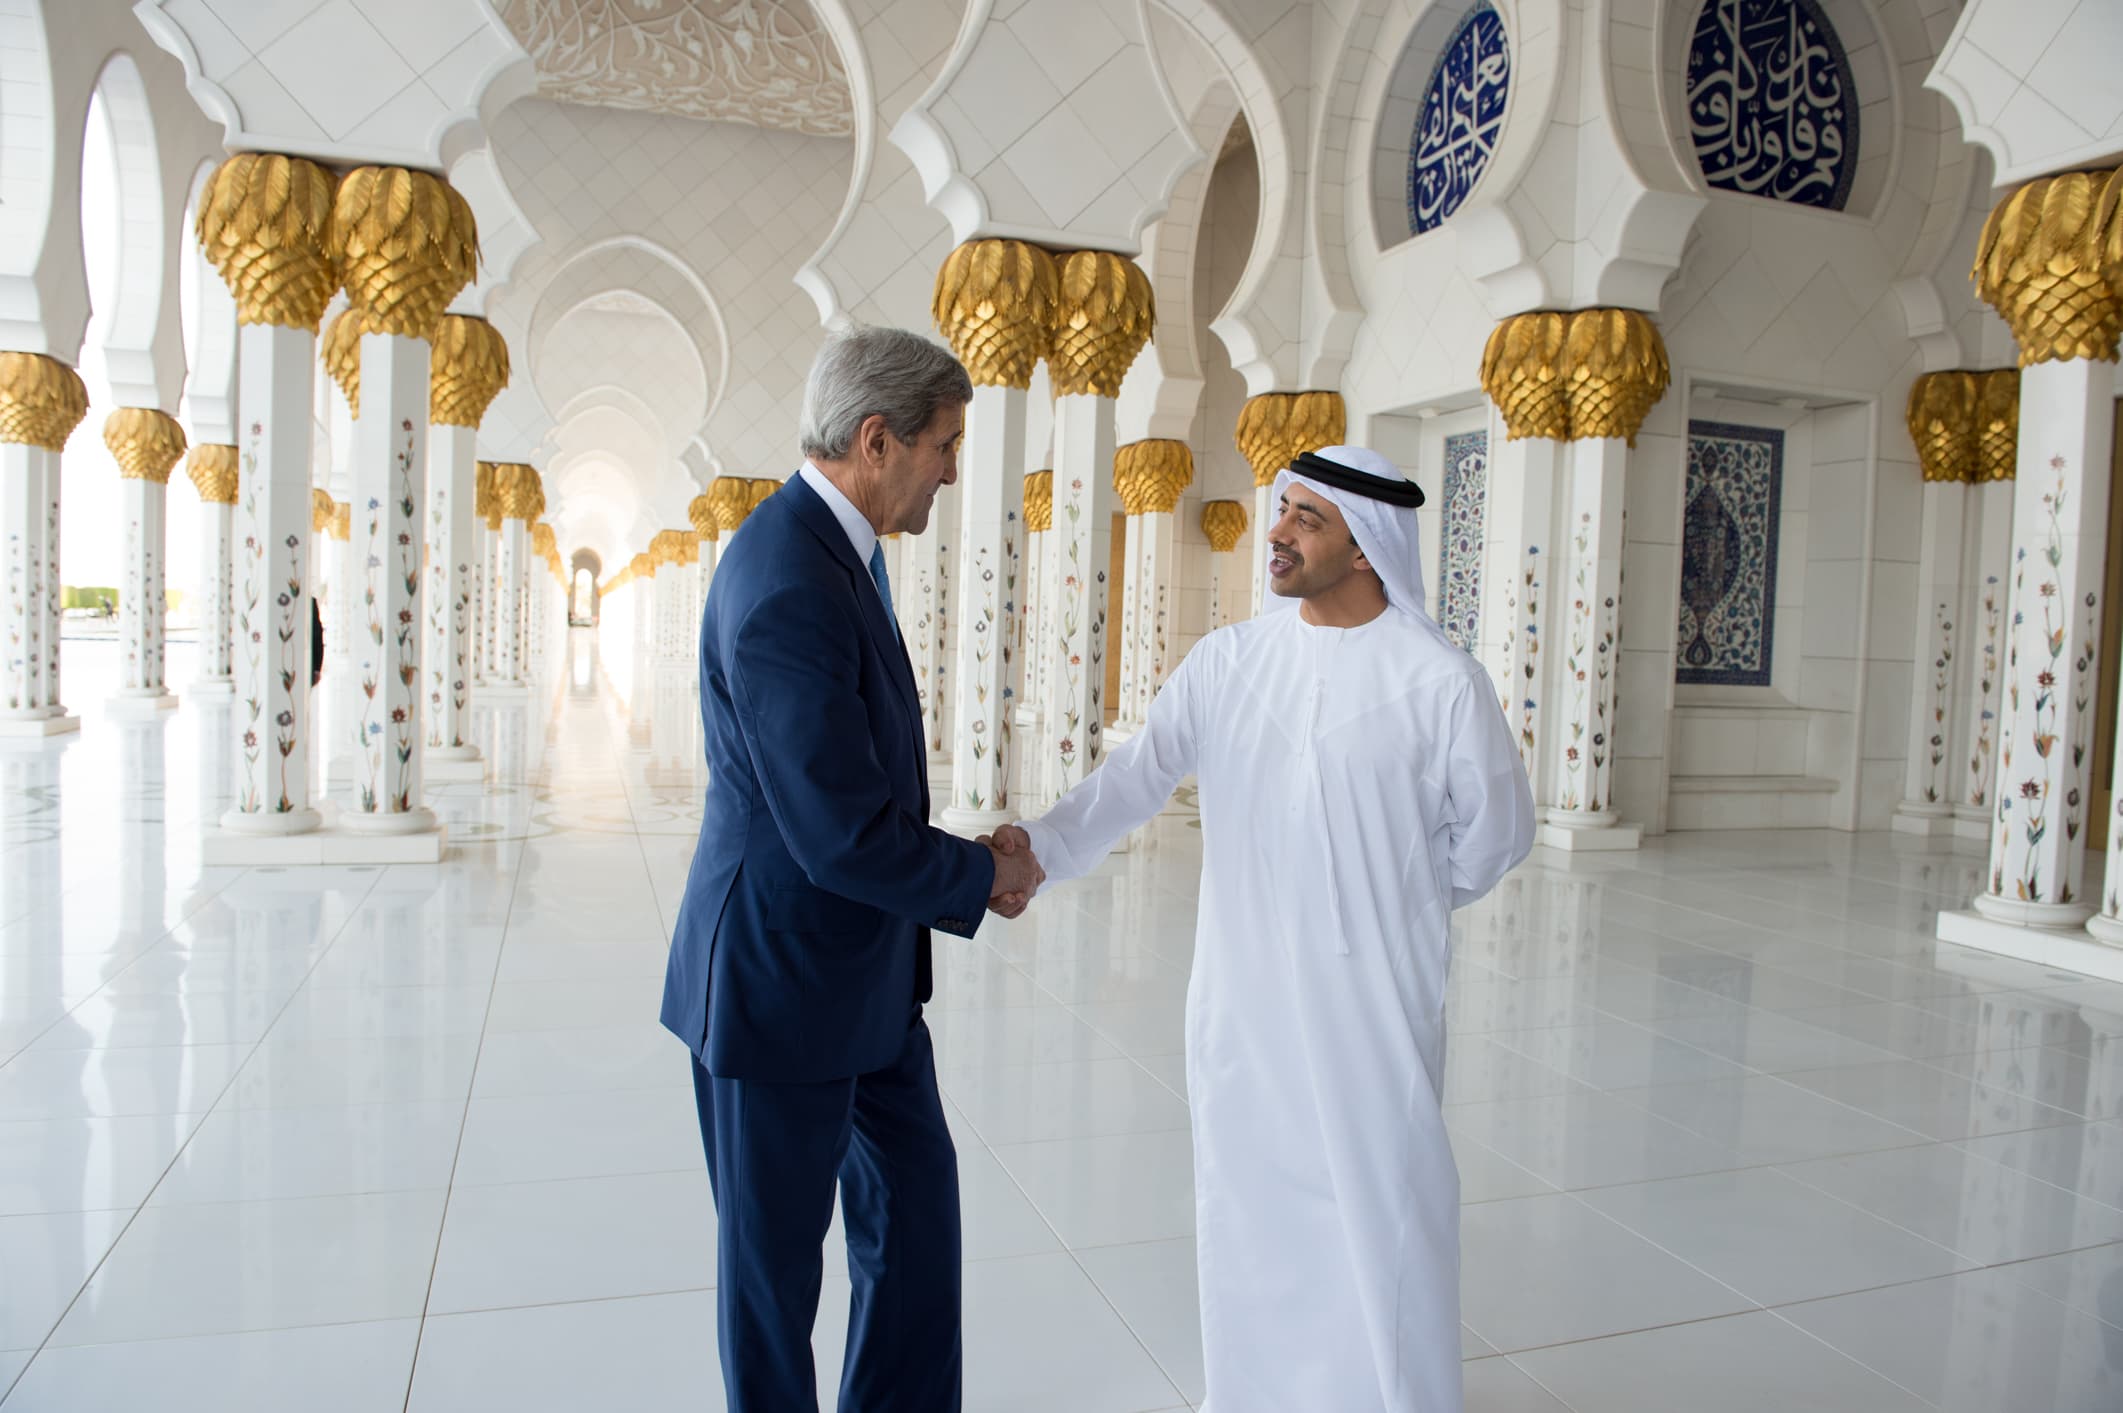 U.S. Secretary of State John Kerry during his visit to the United Arab Emirates toured the Sheikh Zayed Grand Mosque in Abu Dhabi with UAE Foreign Minister, His Highness Sheikh Abdullah bin Zayed Al Nahyan